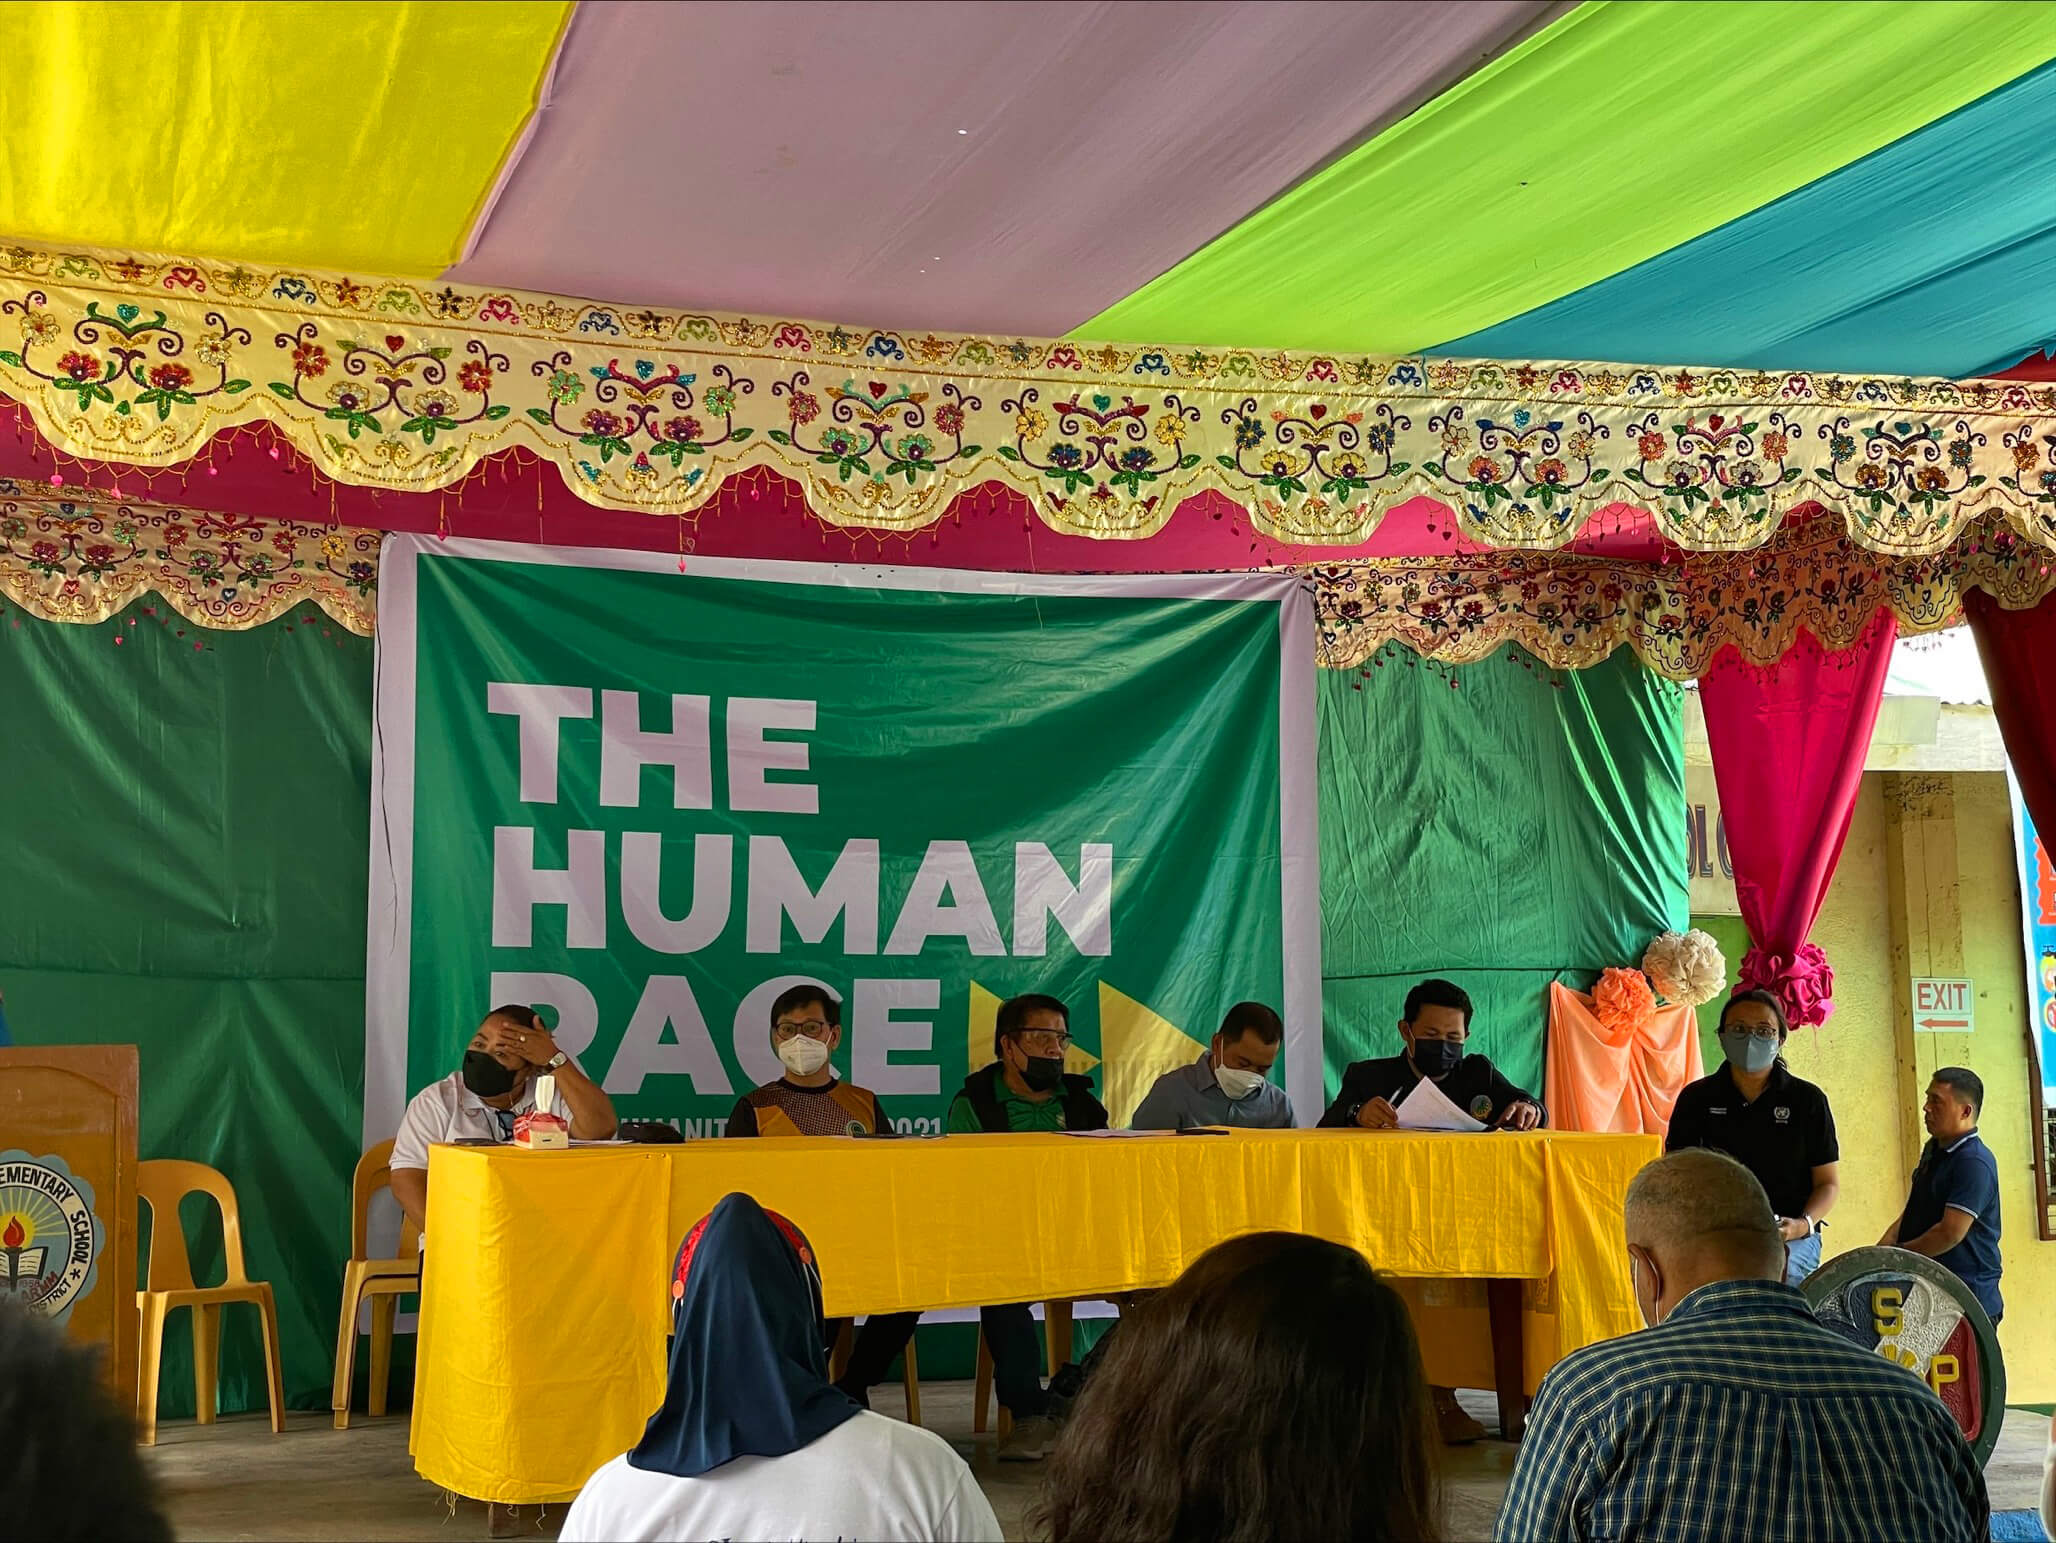 Six individuals sitting in a long table covered in yellow table cloth. Behind them is a green backdrop tarpaulin with bold text " THE HUMAN RACE" An audience is seated in front of them.